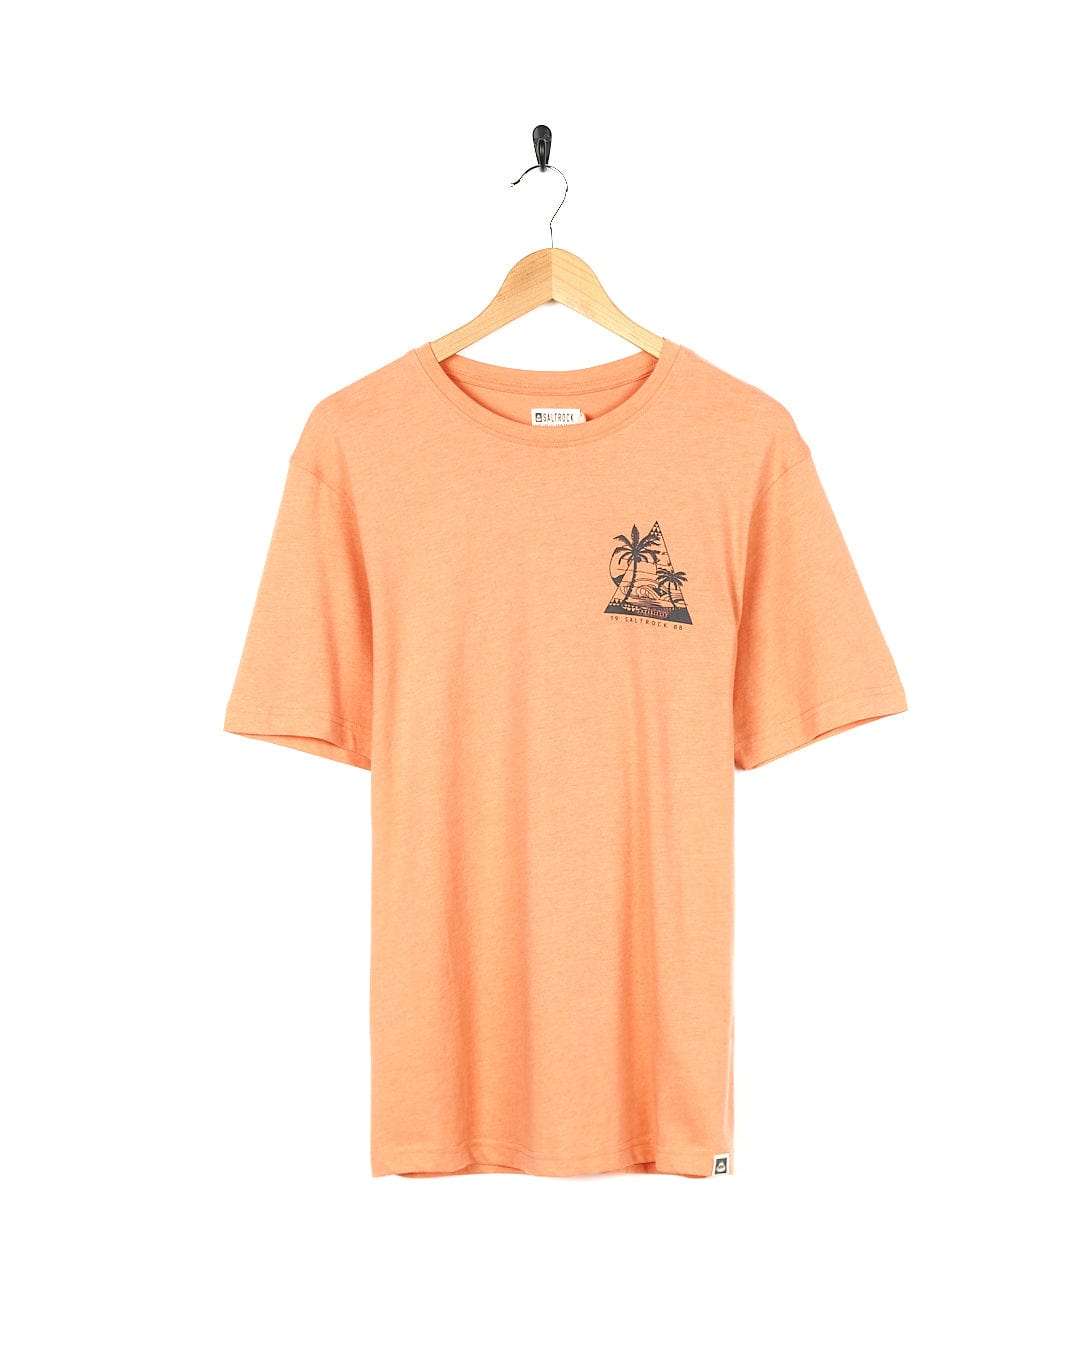 A Geo Beach - Mens Short Sleeve T-Shirt - Coral by Saltrock with a palm tree on it.